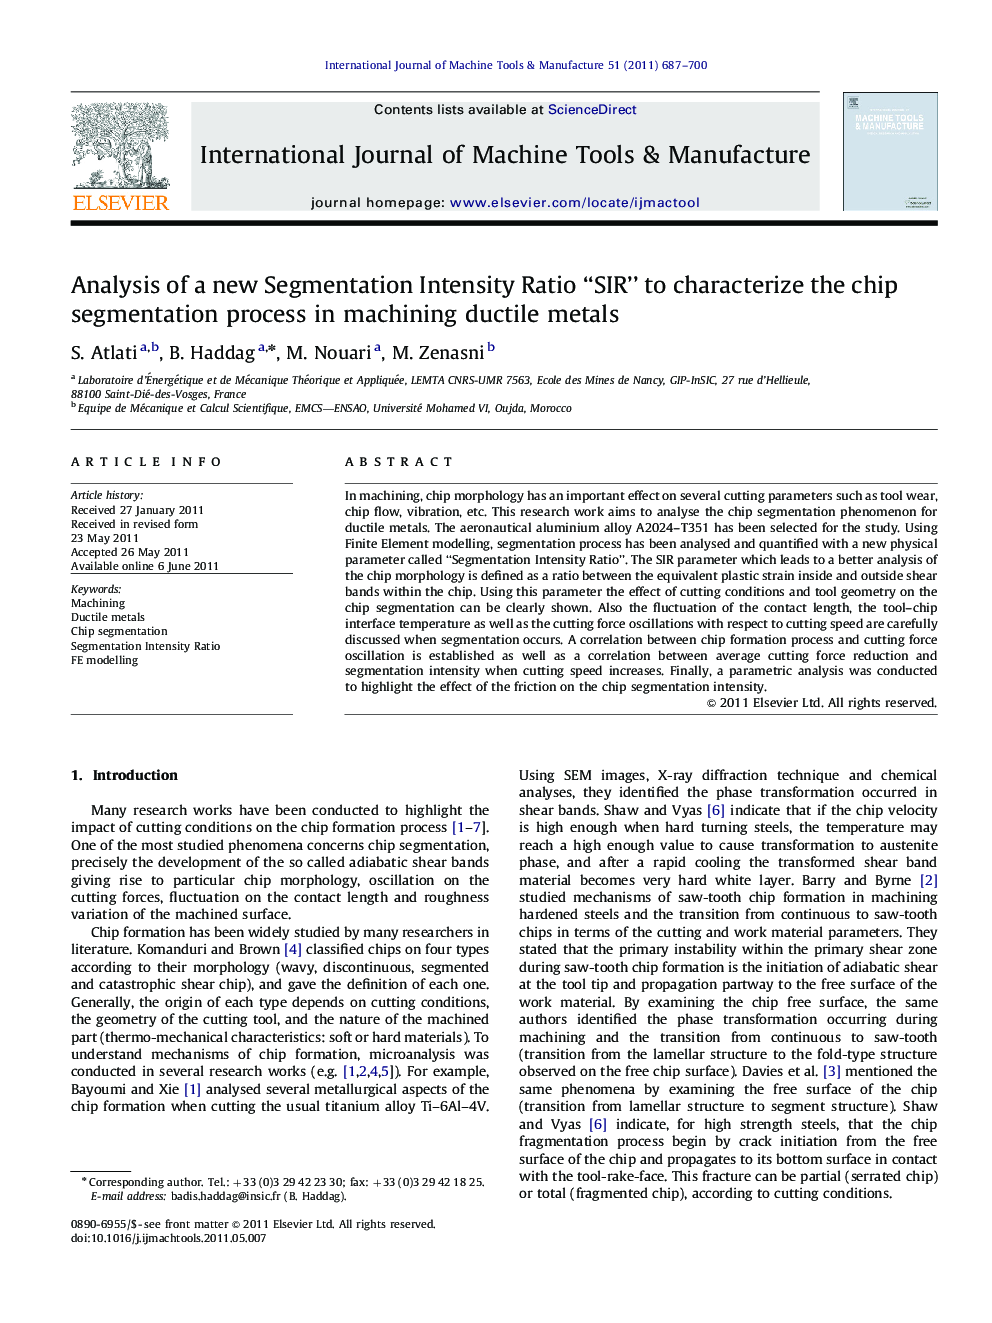 Analysis of a new Segmentation Intensity Ratio “SIR” to characterize the chip segmentation process in machining ductile metals